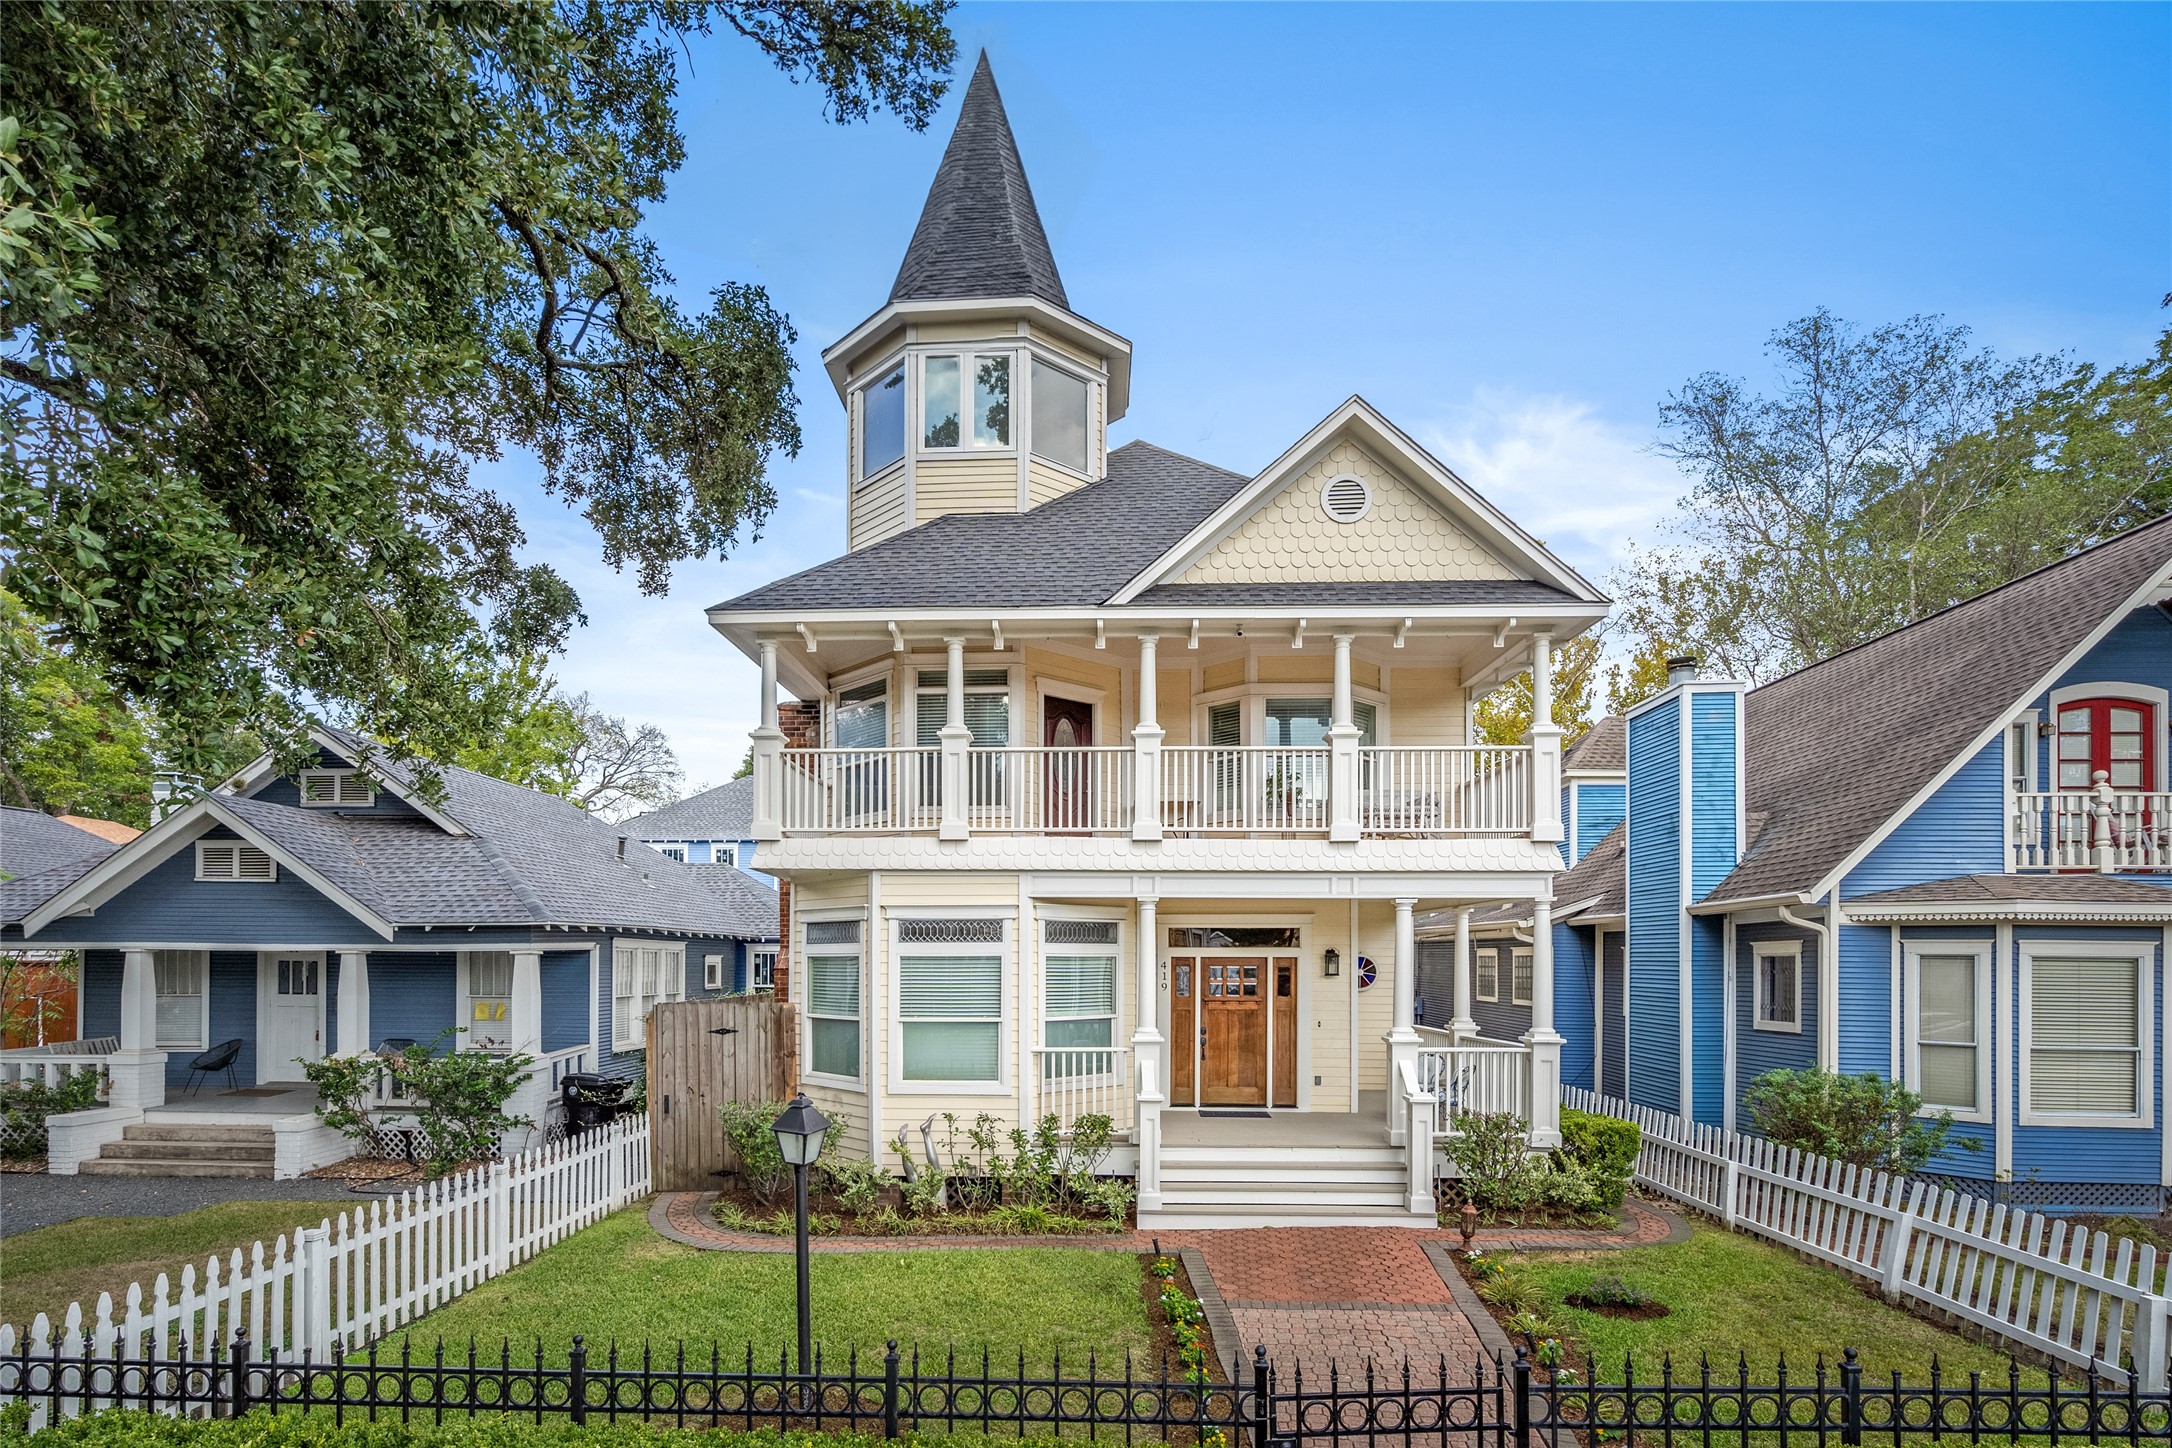 Charming two story was renovated and designed for todays lifestyle.  Wrought iron front fencing, paver sidewalk to the wrap around front porch. Wonderful curb appeal!